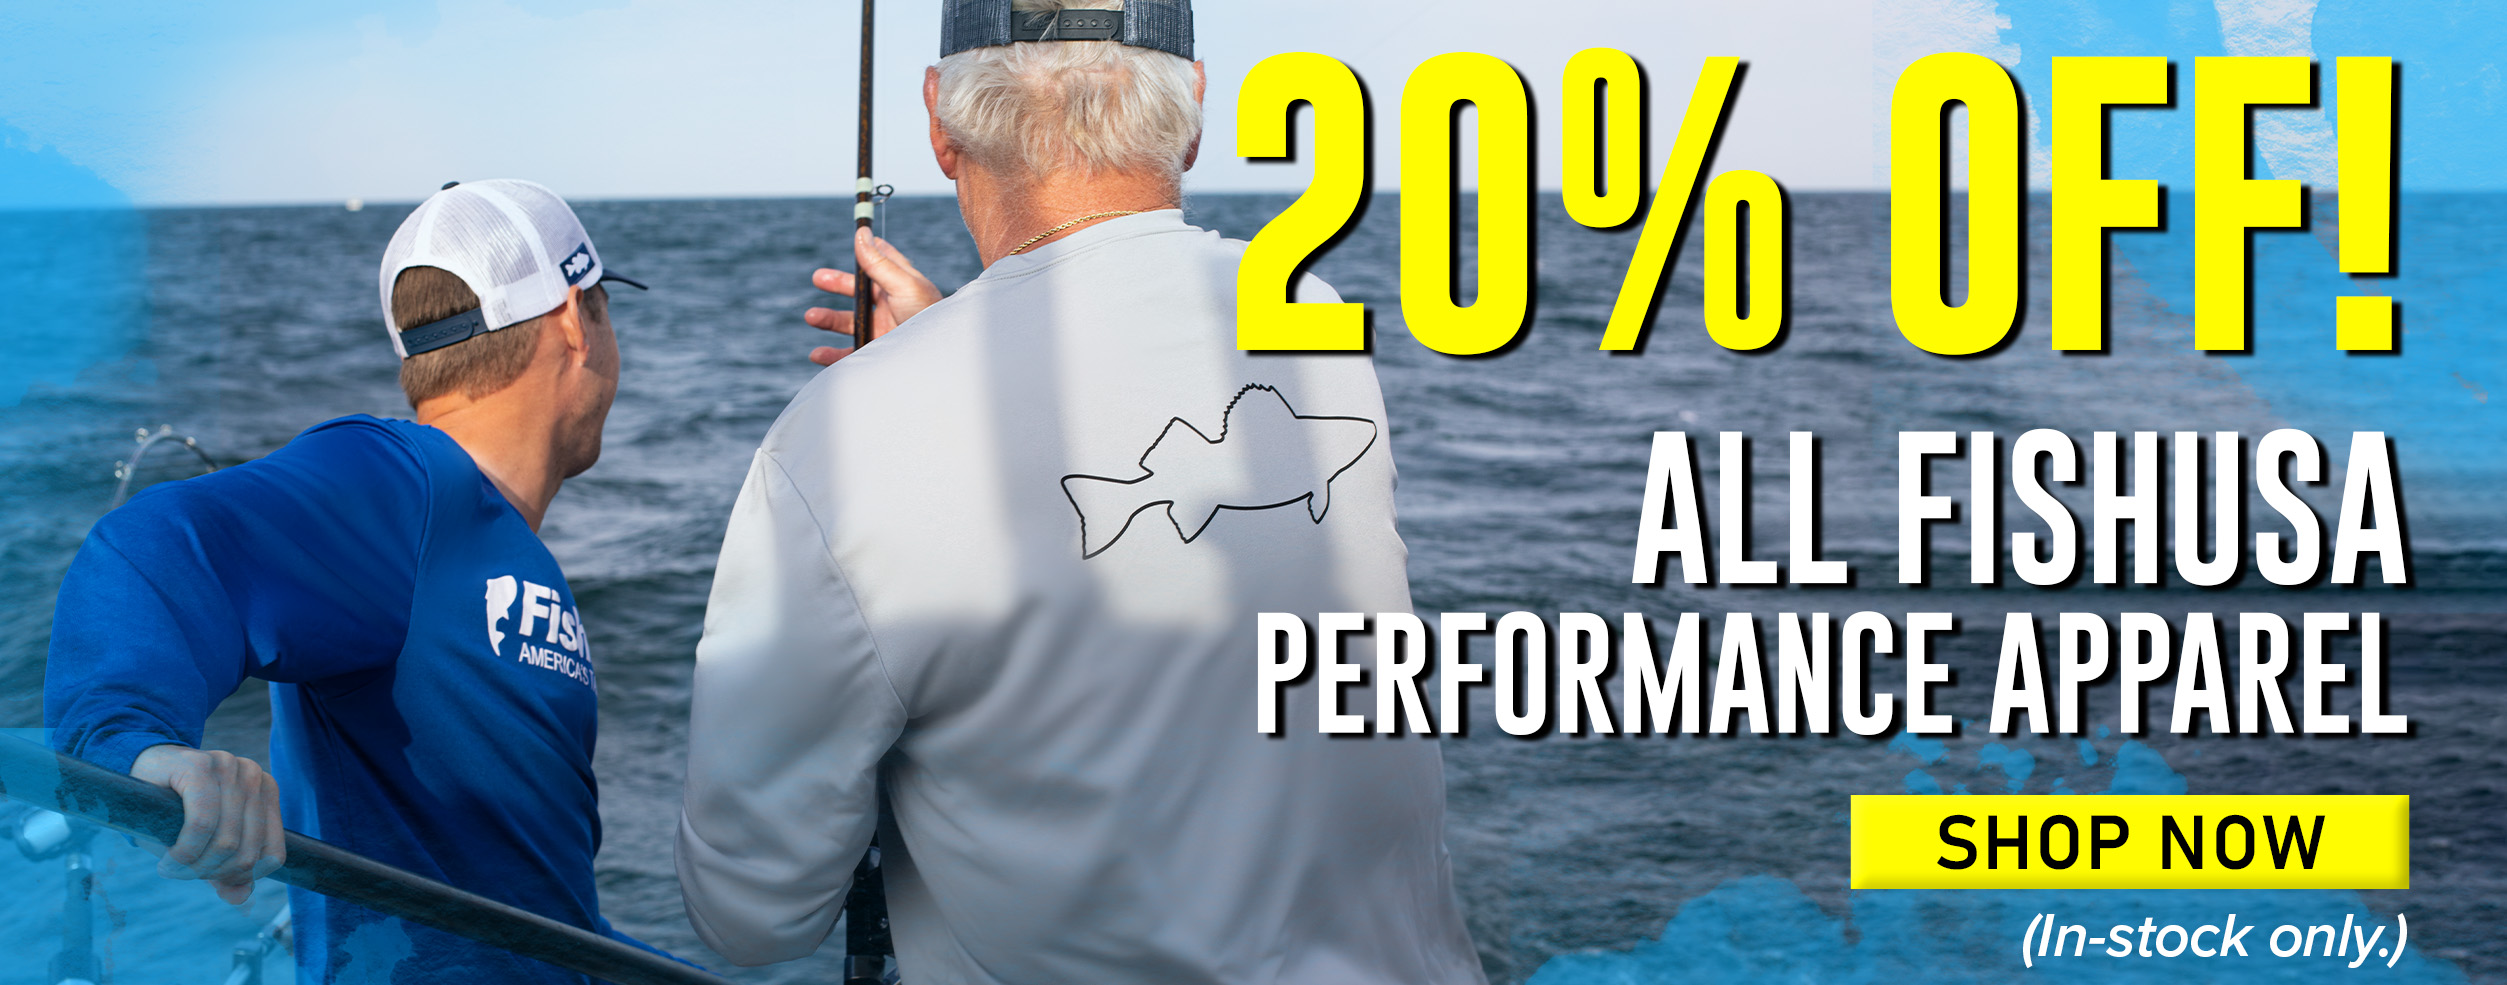 20% Off All FishUSA Performance Apparel Shop Now (In-stock only.)